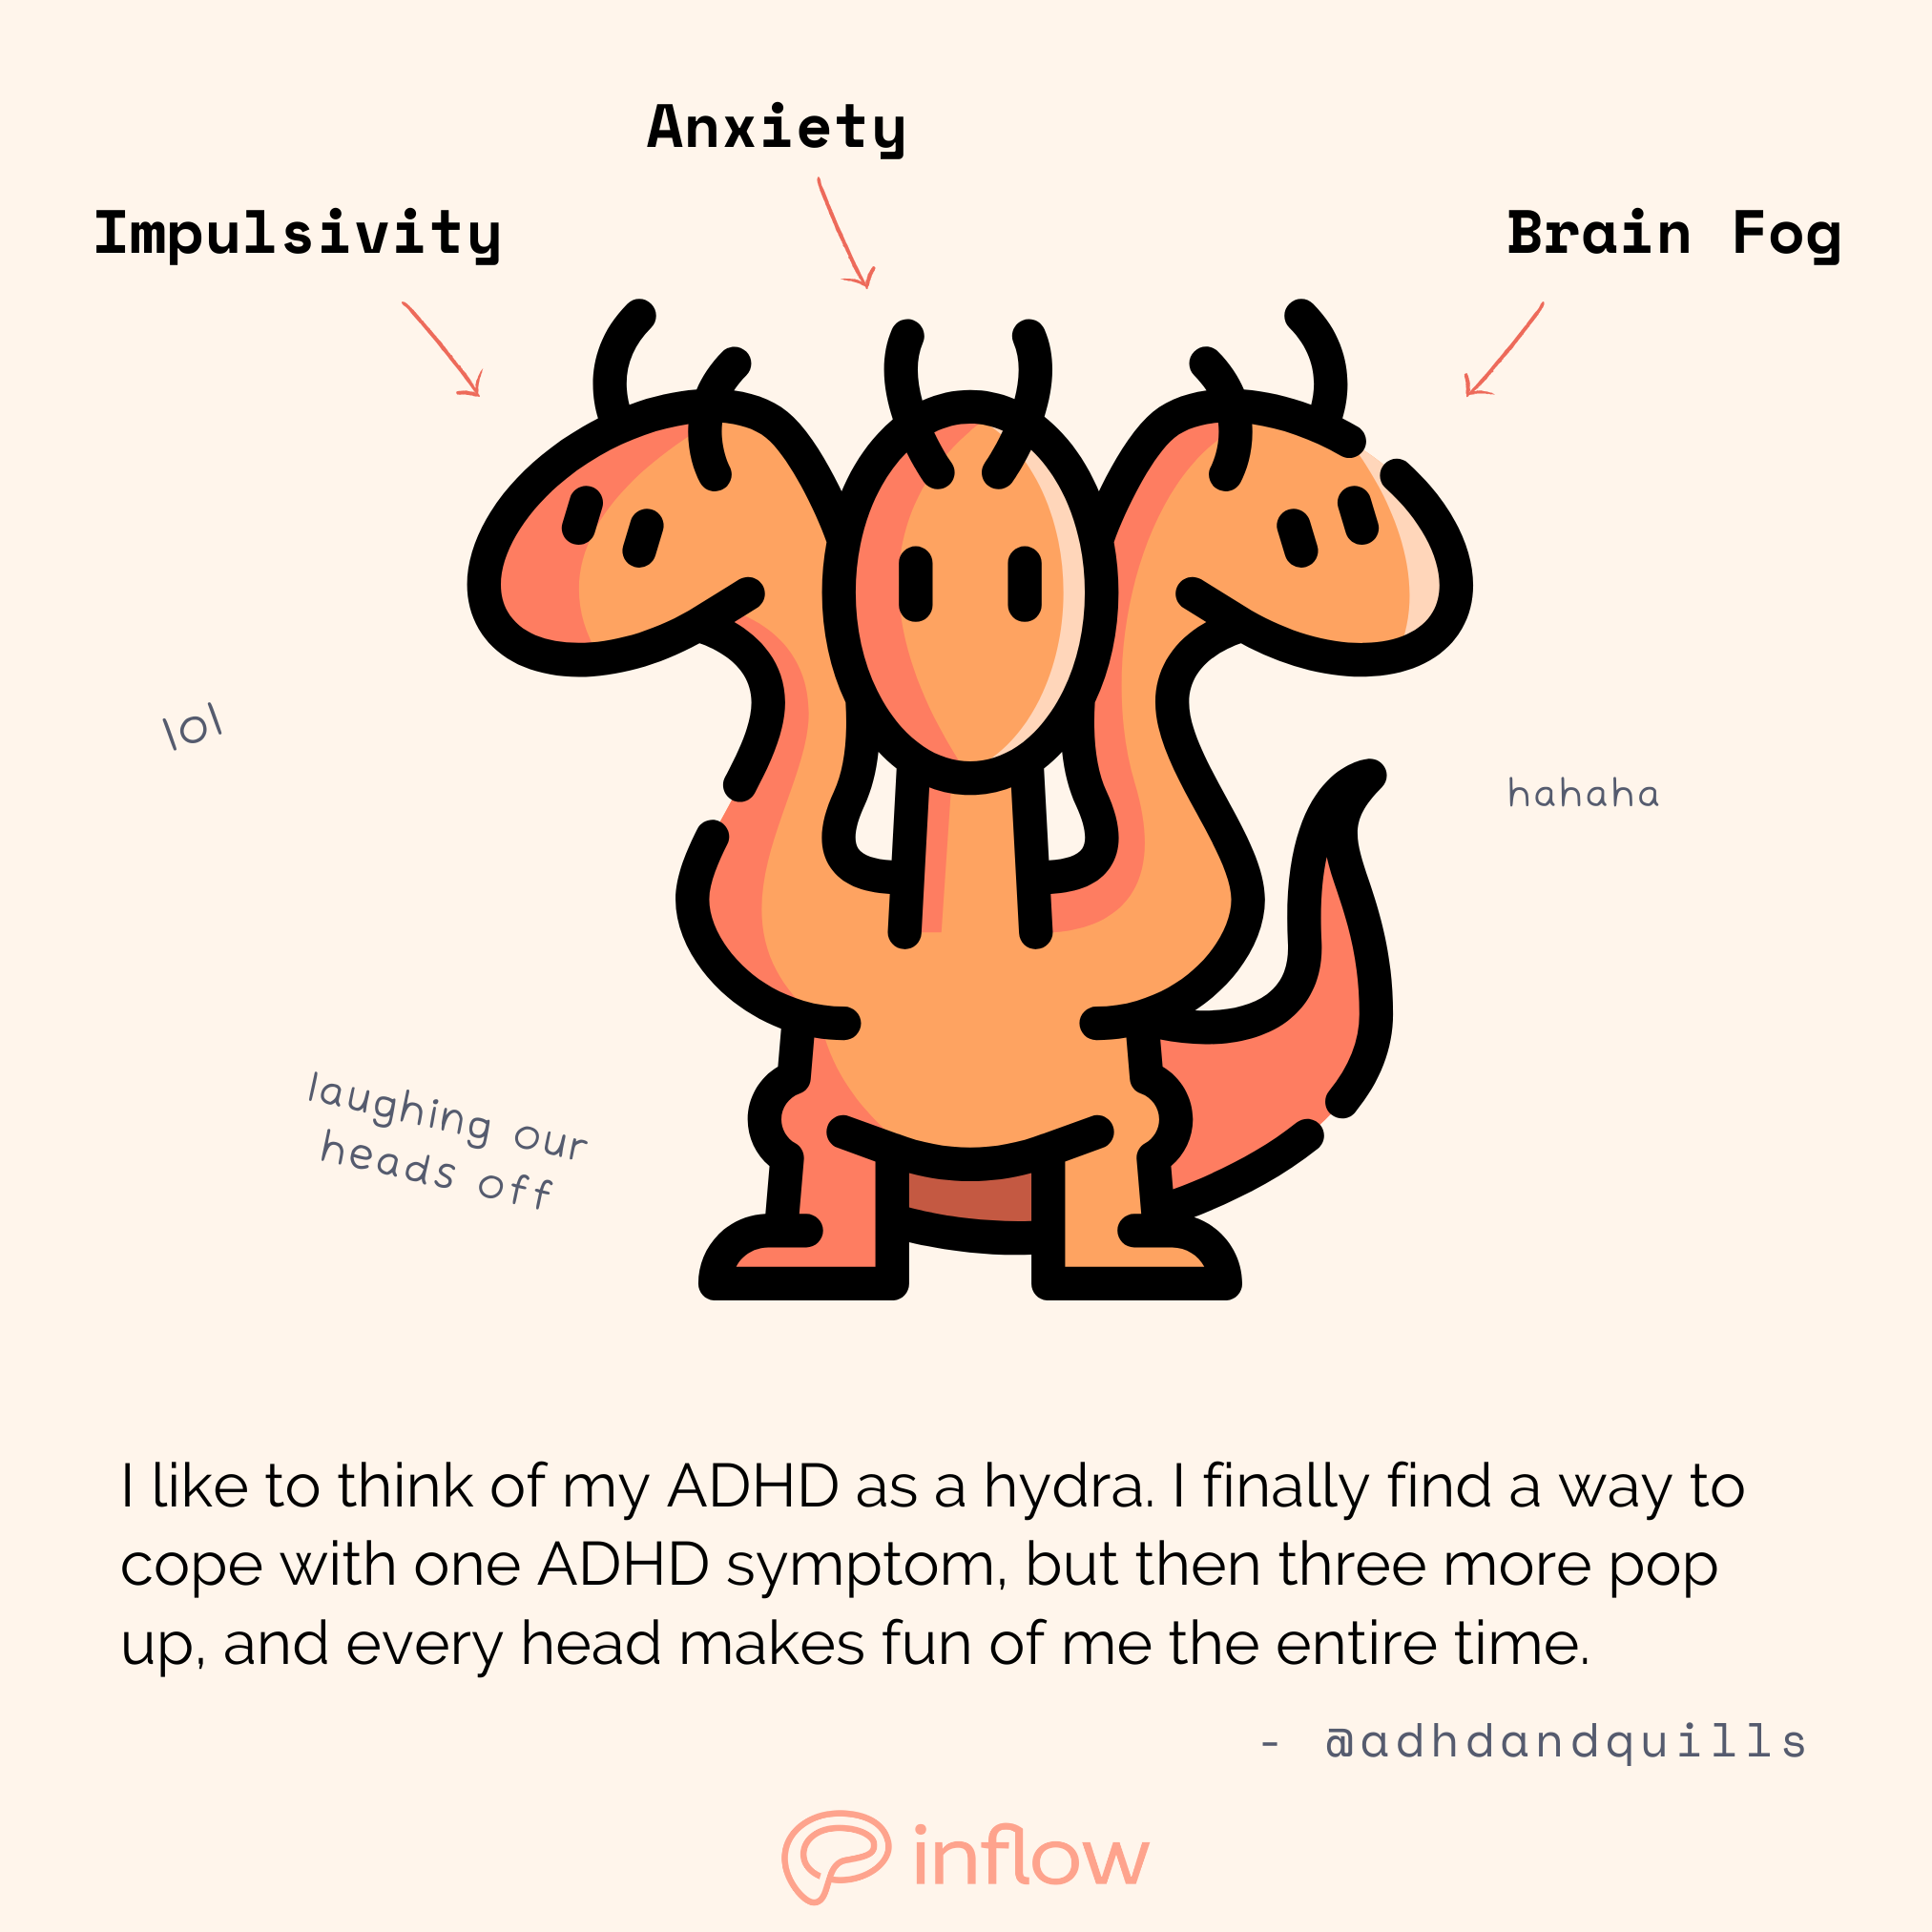 an illustration of a 3-headed hydra, each of the heads labeled with an ADHD symptom: Impulsivity, anxiety, and brain fog. There is small text in the background that reads "lol", "laughing our heads off", and "hahaha". At the bottom is the hydra quote from above.